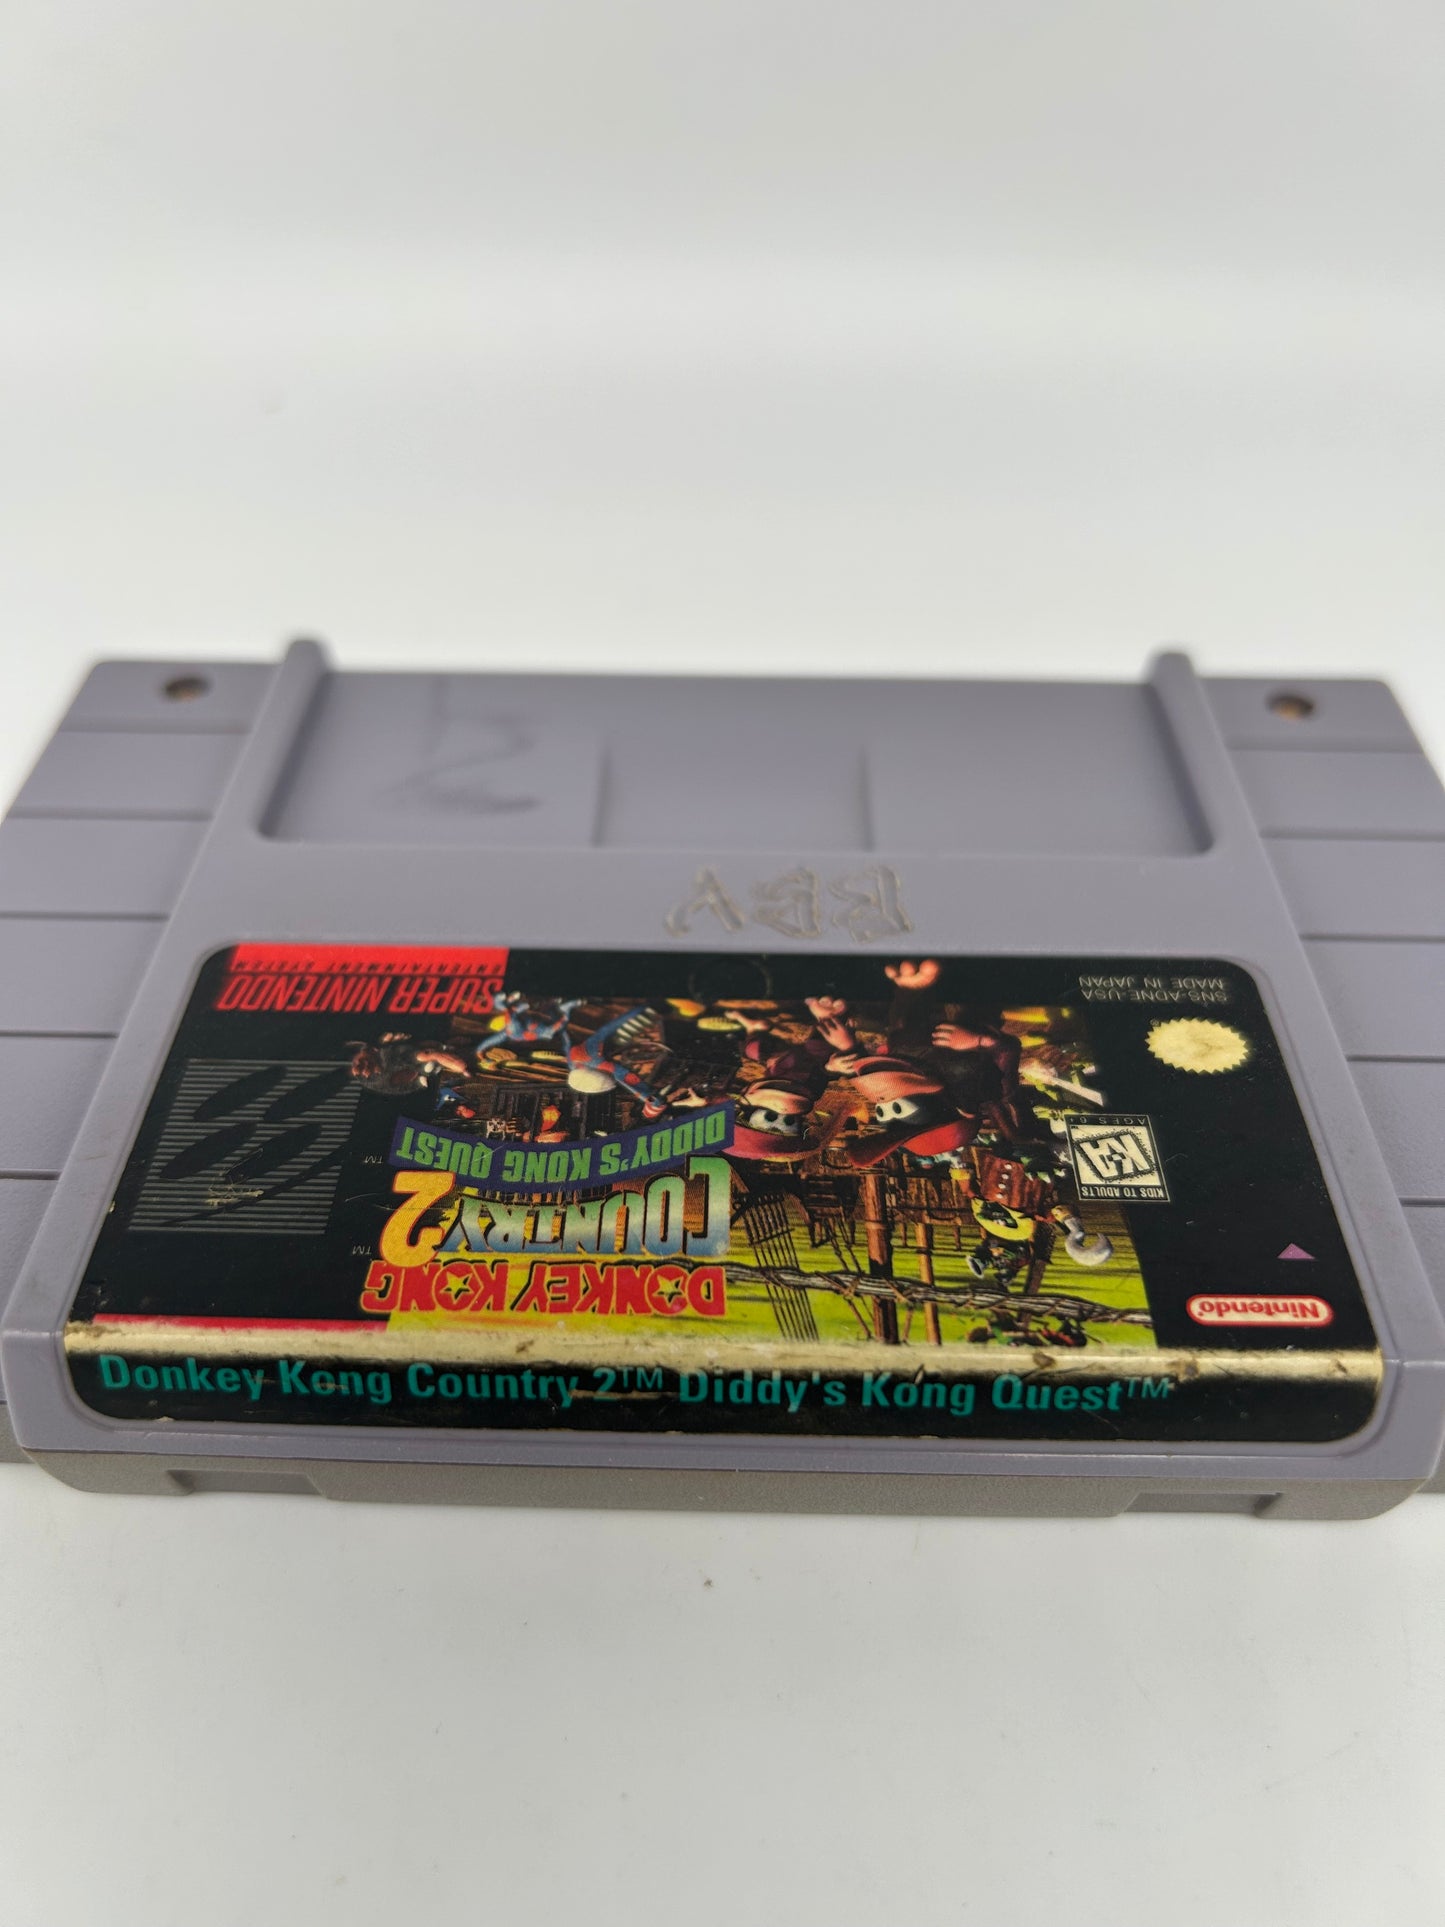 SUPER NiNTENDO [SNES] | DONKEY KONG COUNTRY 2 DiDDYS KONG QUEST